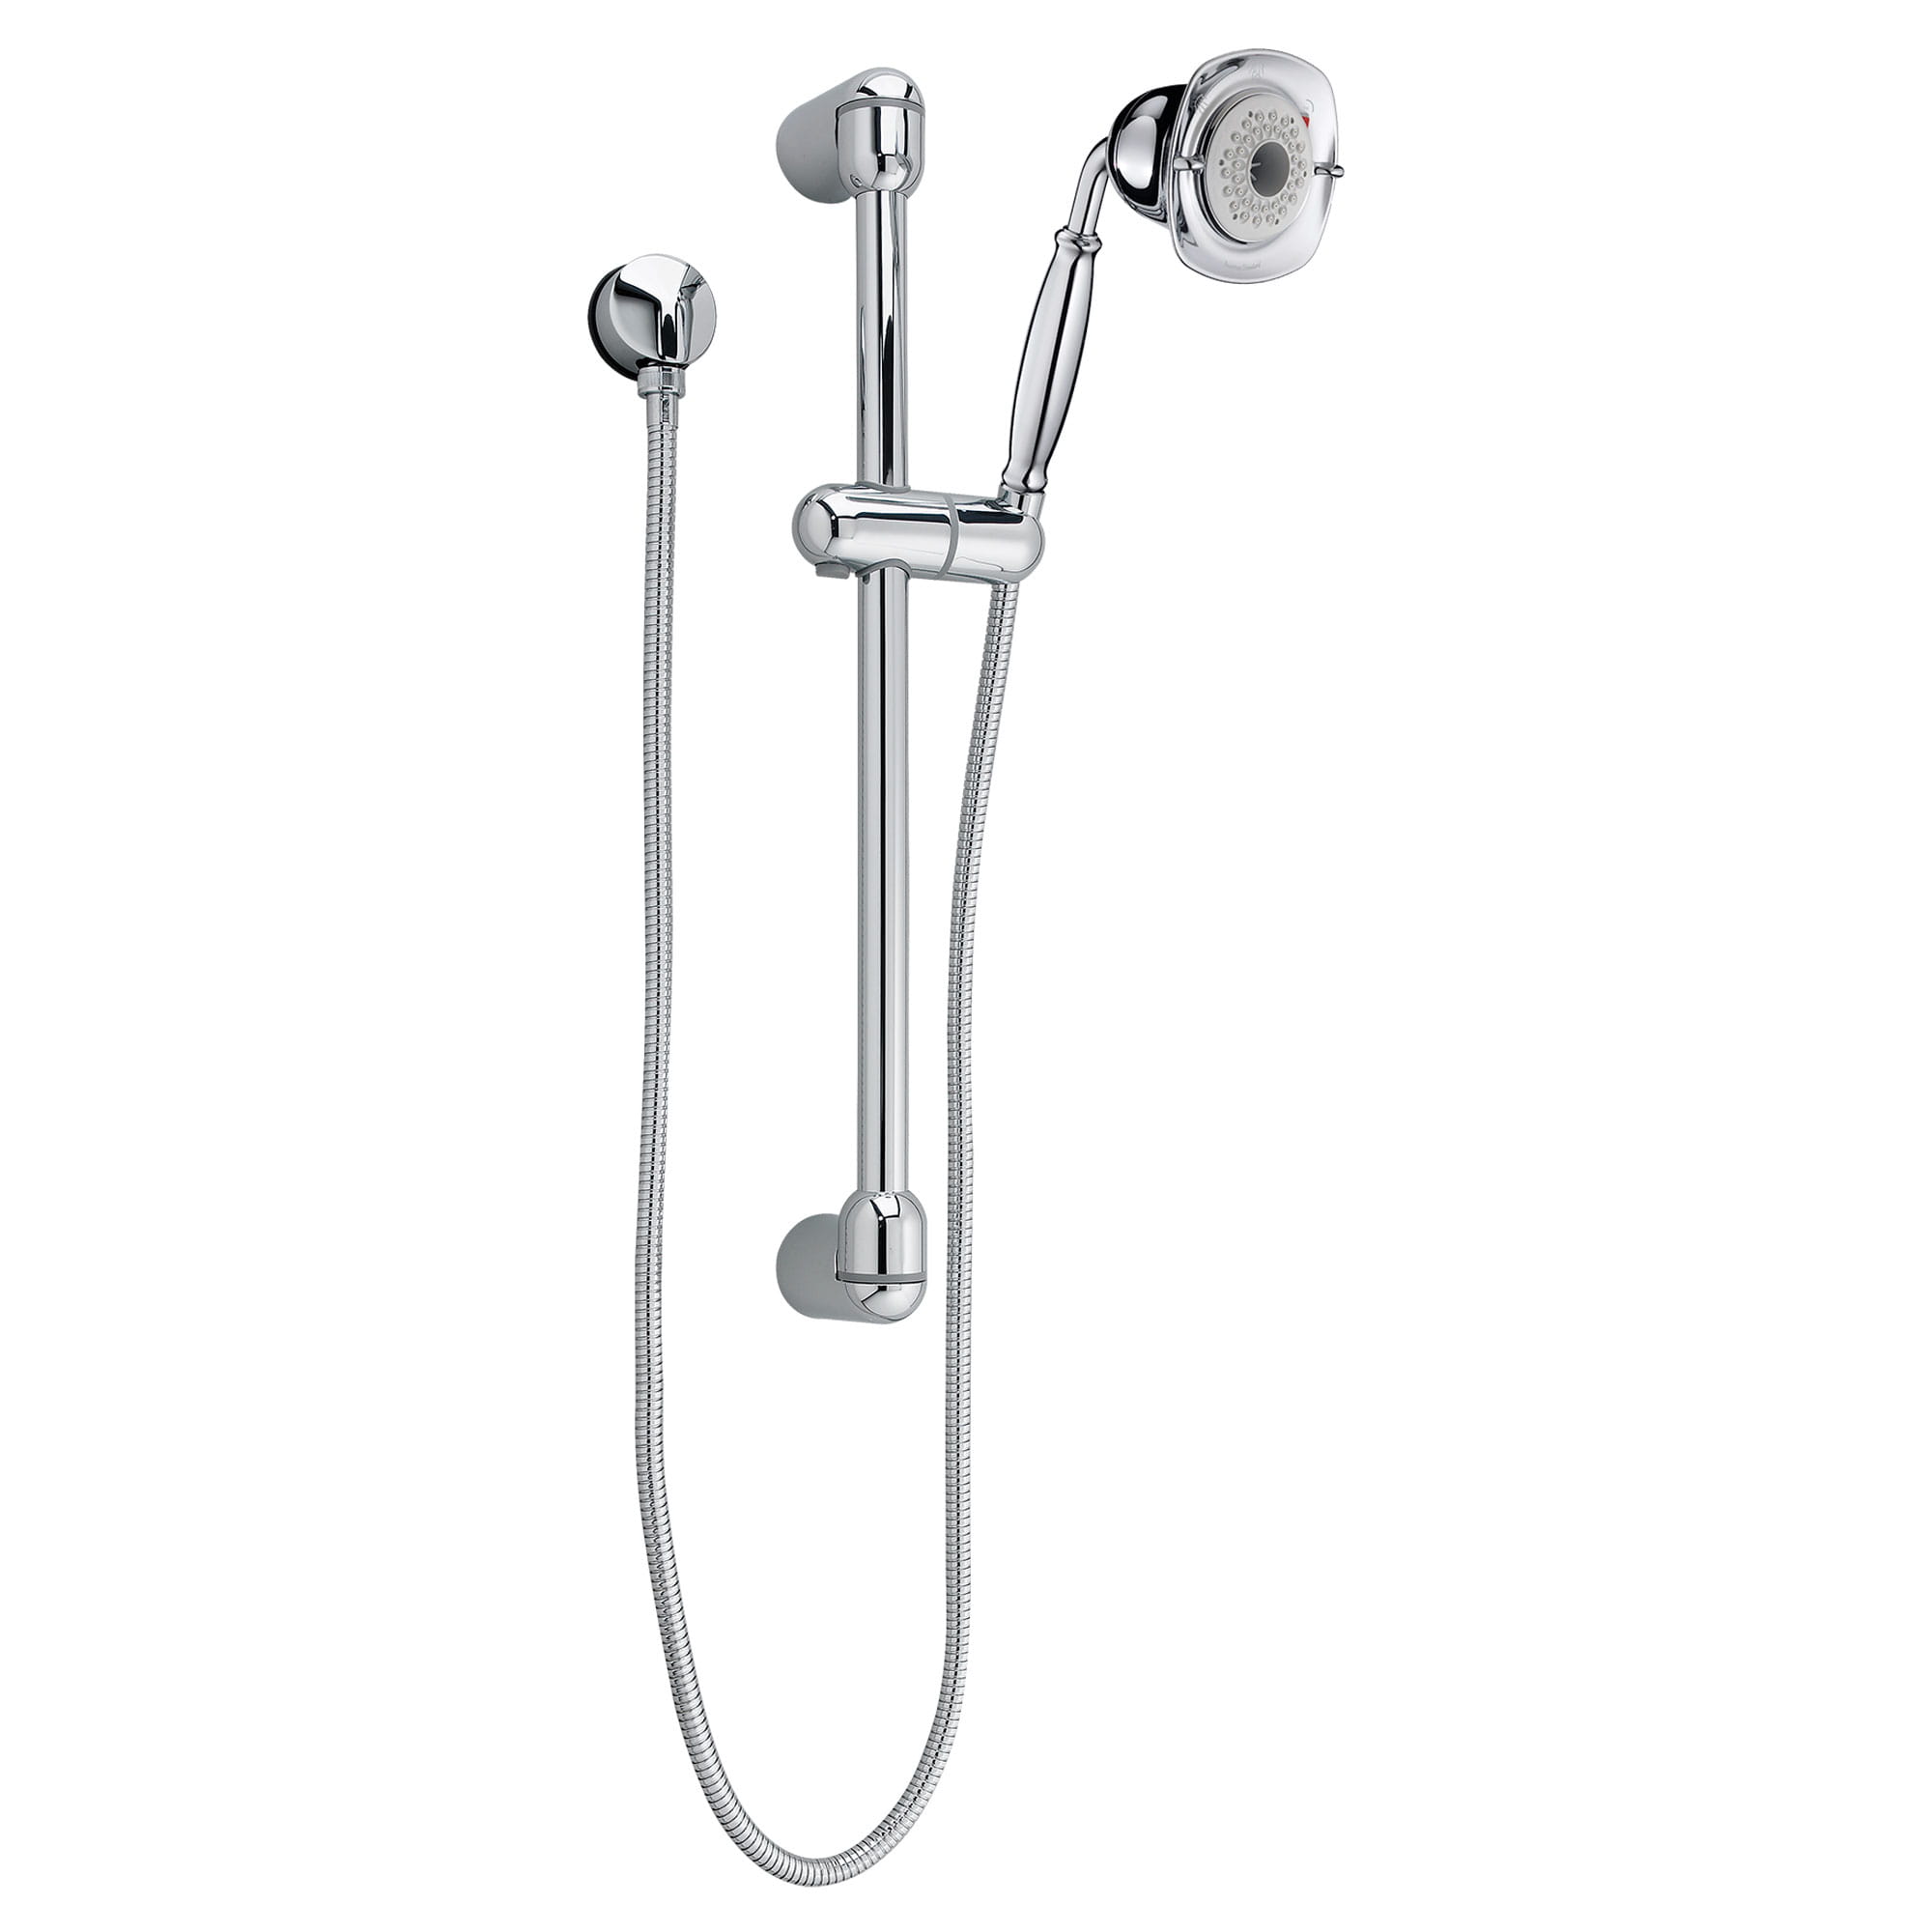 FloWise 25 In 3 Function 20 GPM Shower System Kit CHROME